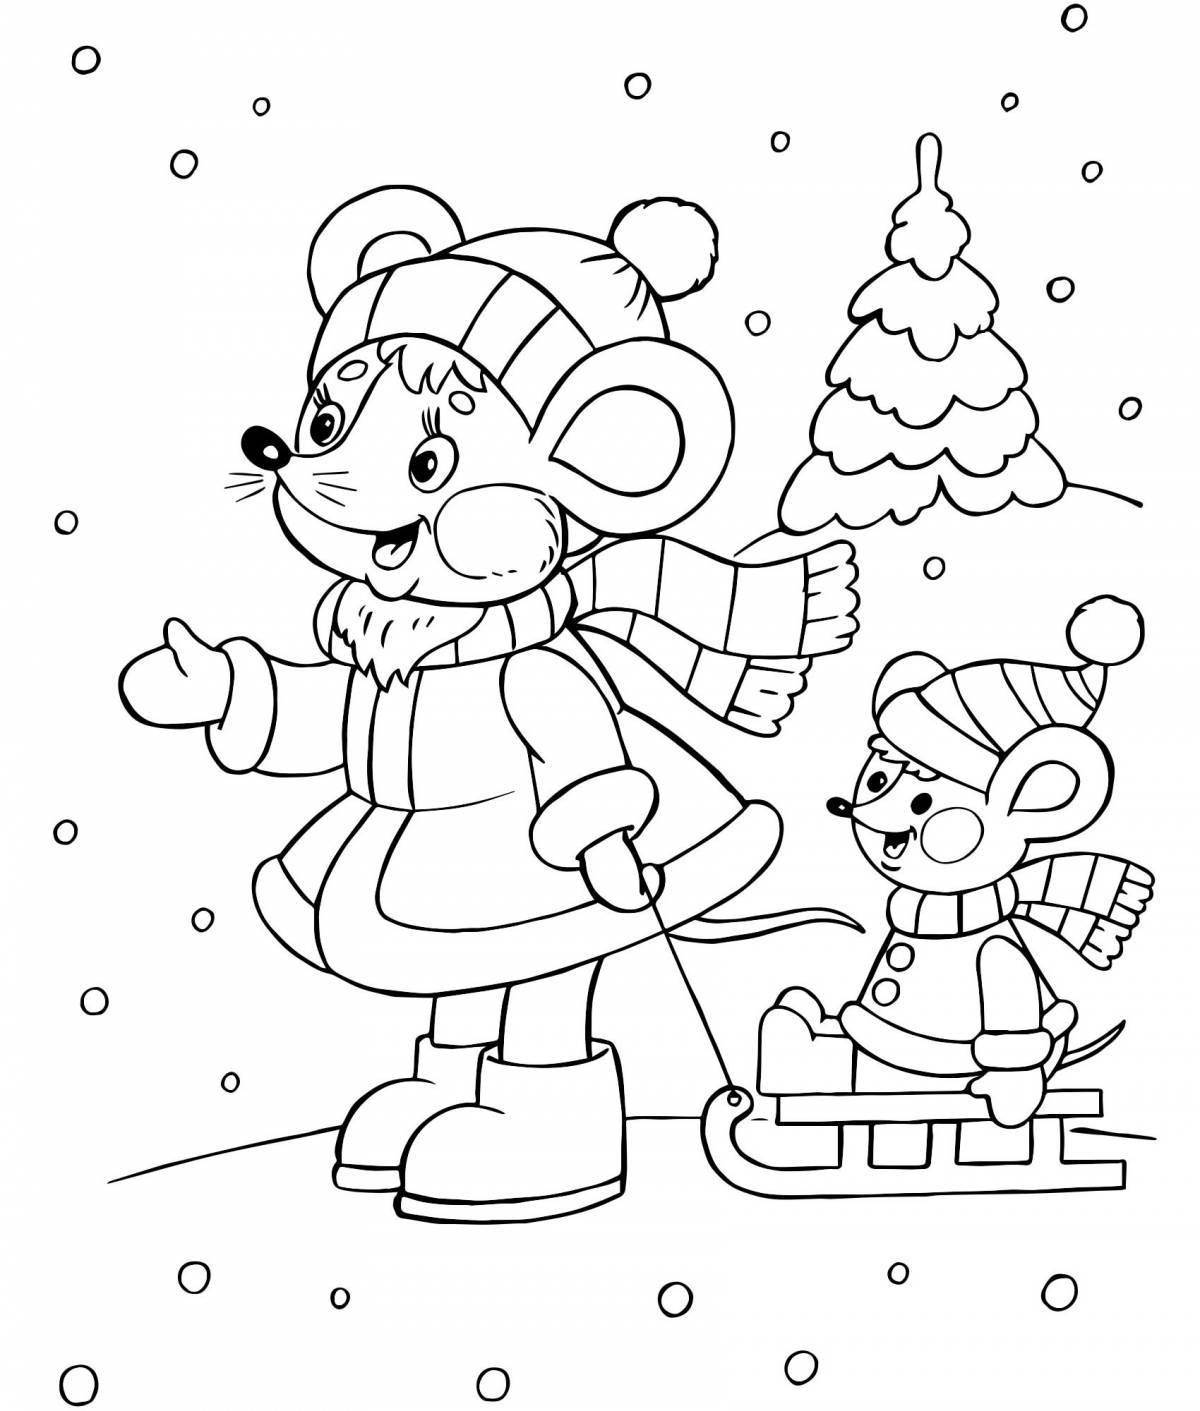 Exquisite winter coloring book for kids 6-7 years old